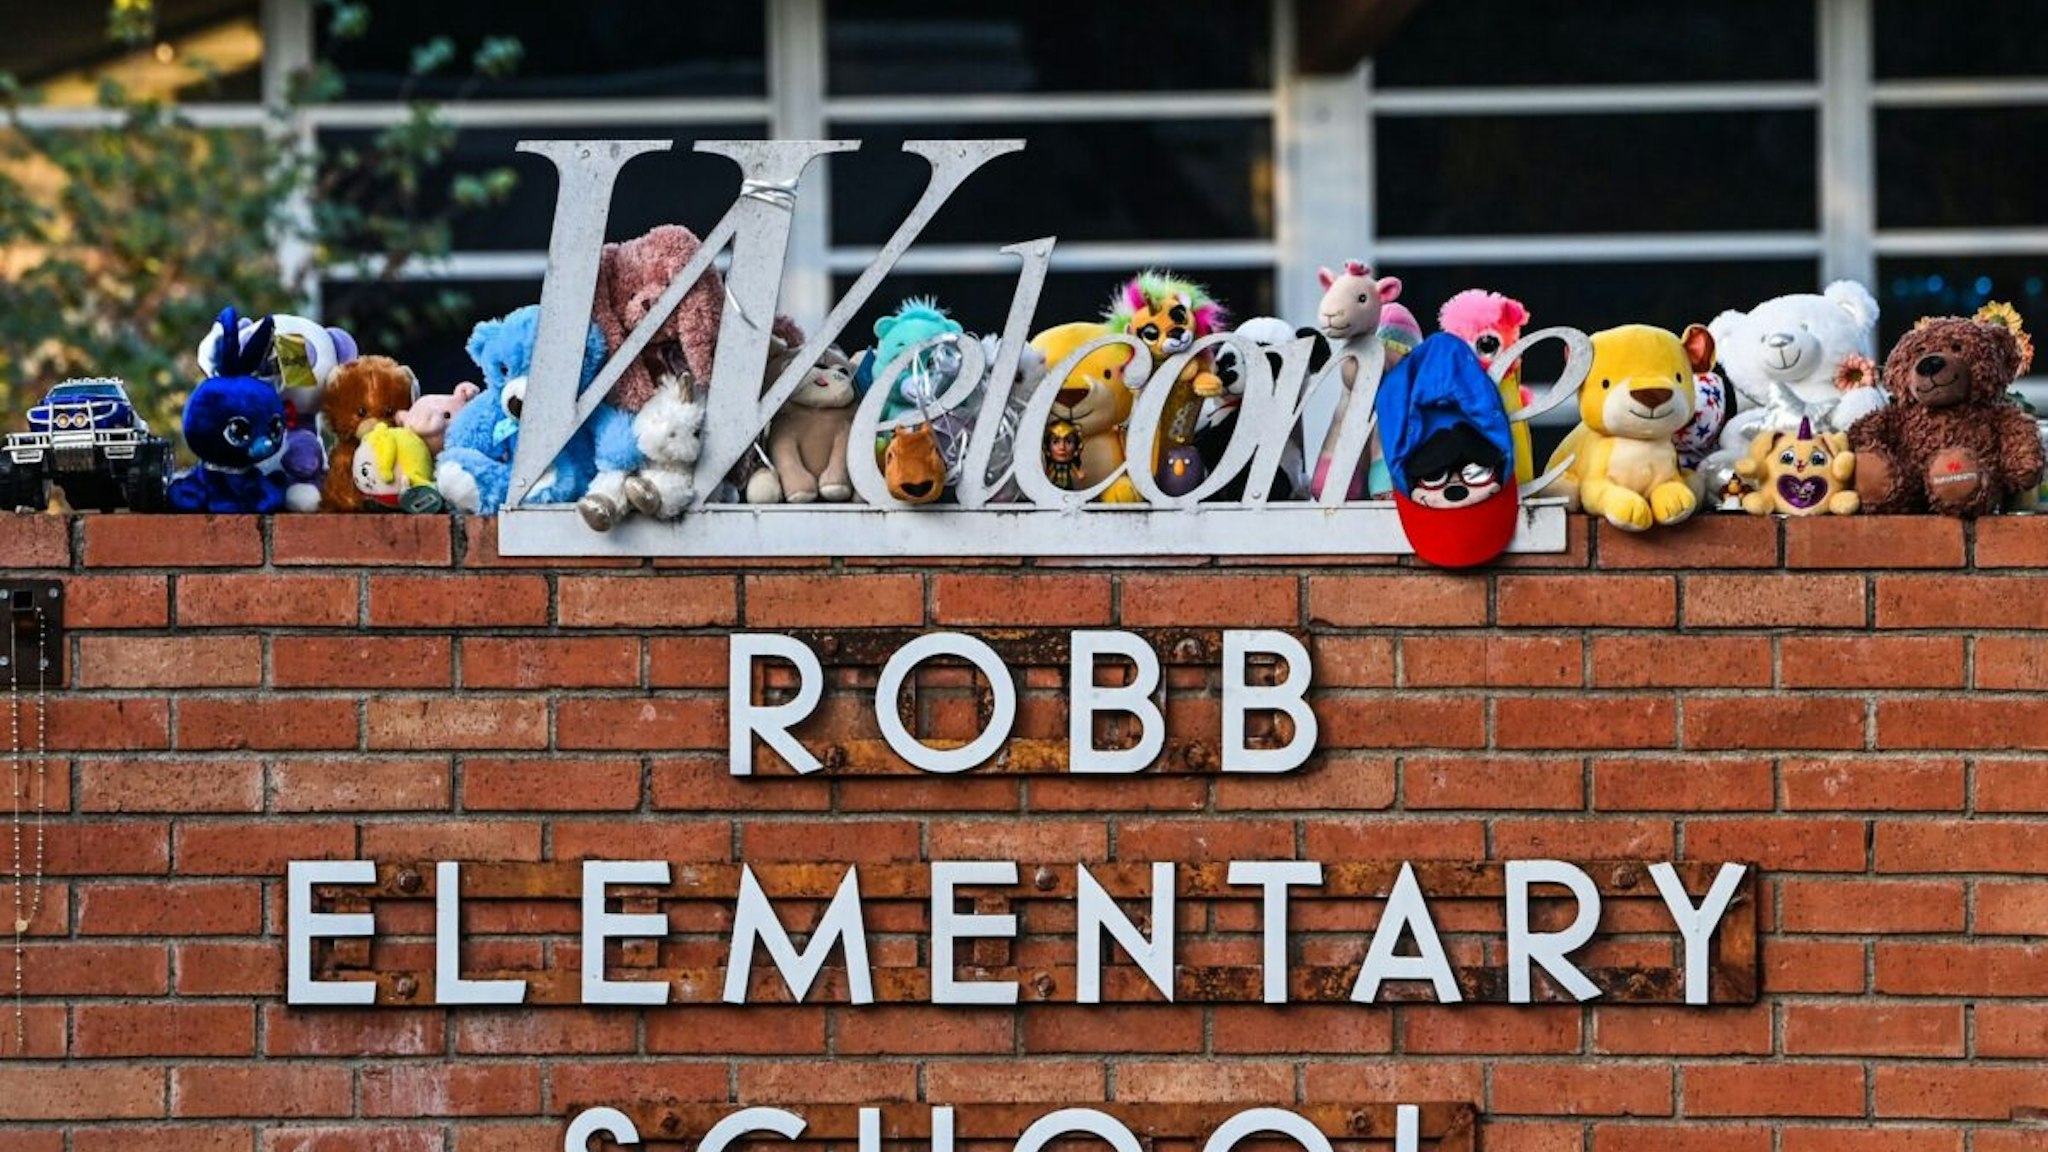 Mementos decorate a makeshift memorial for the shooting victims outside Robb Elementary School in Uvalde, Texas, on May 28, 2022